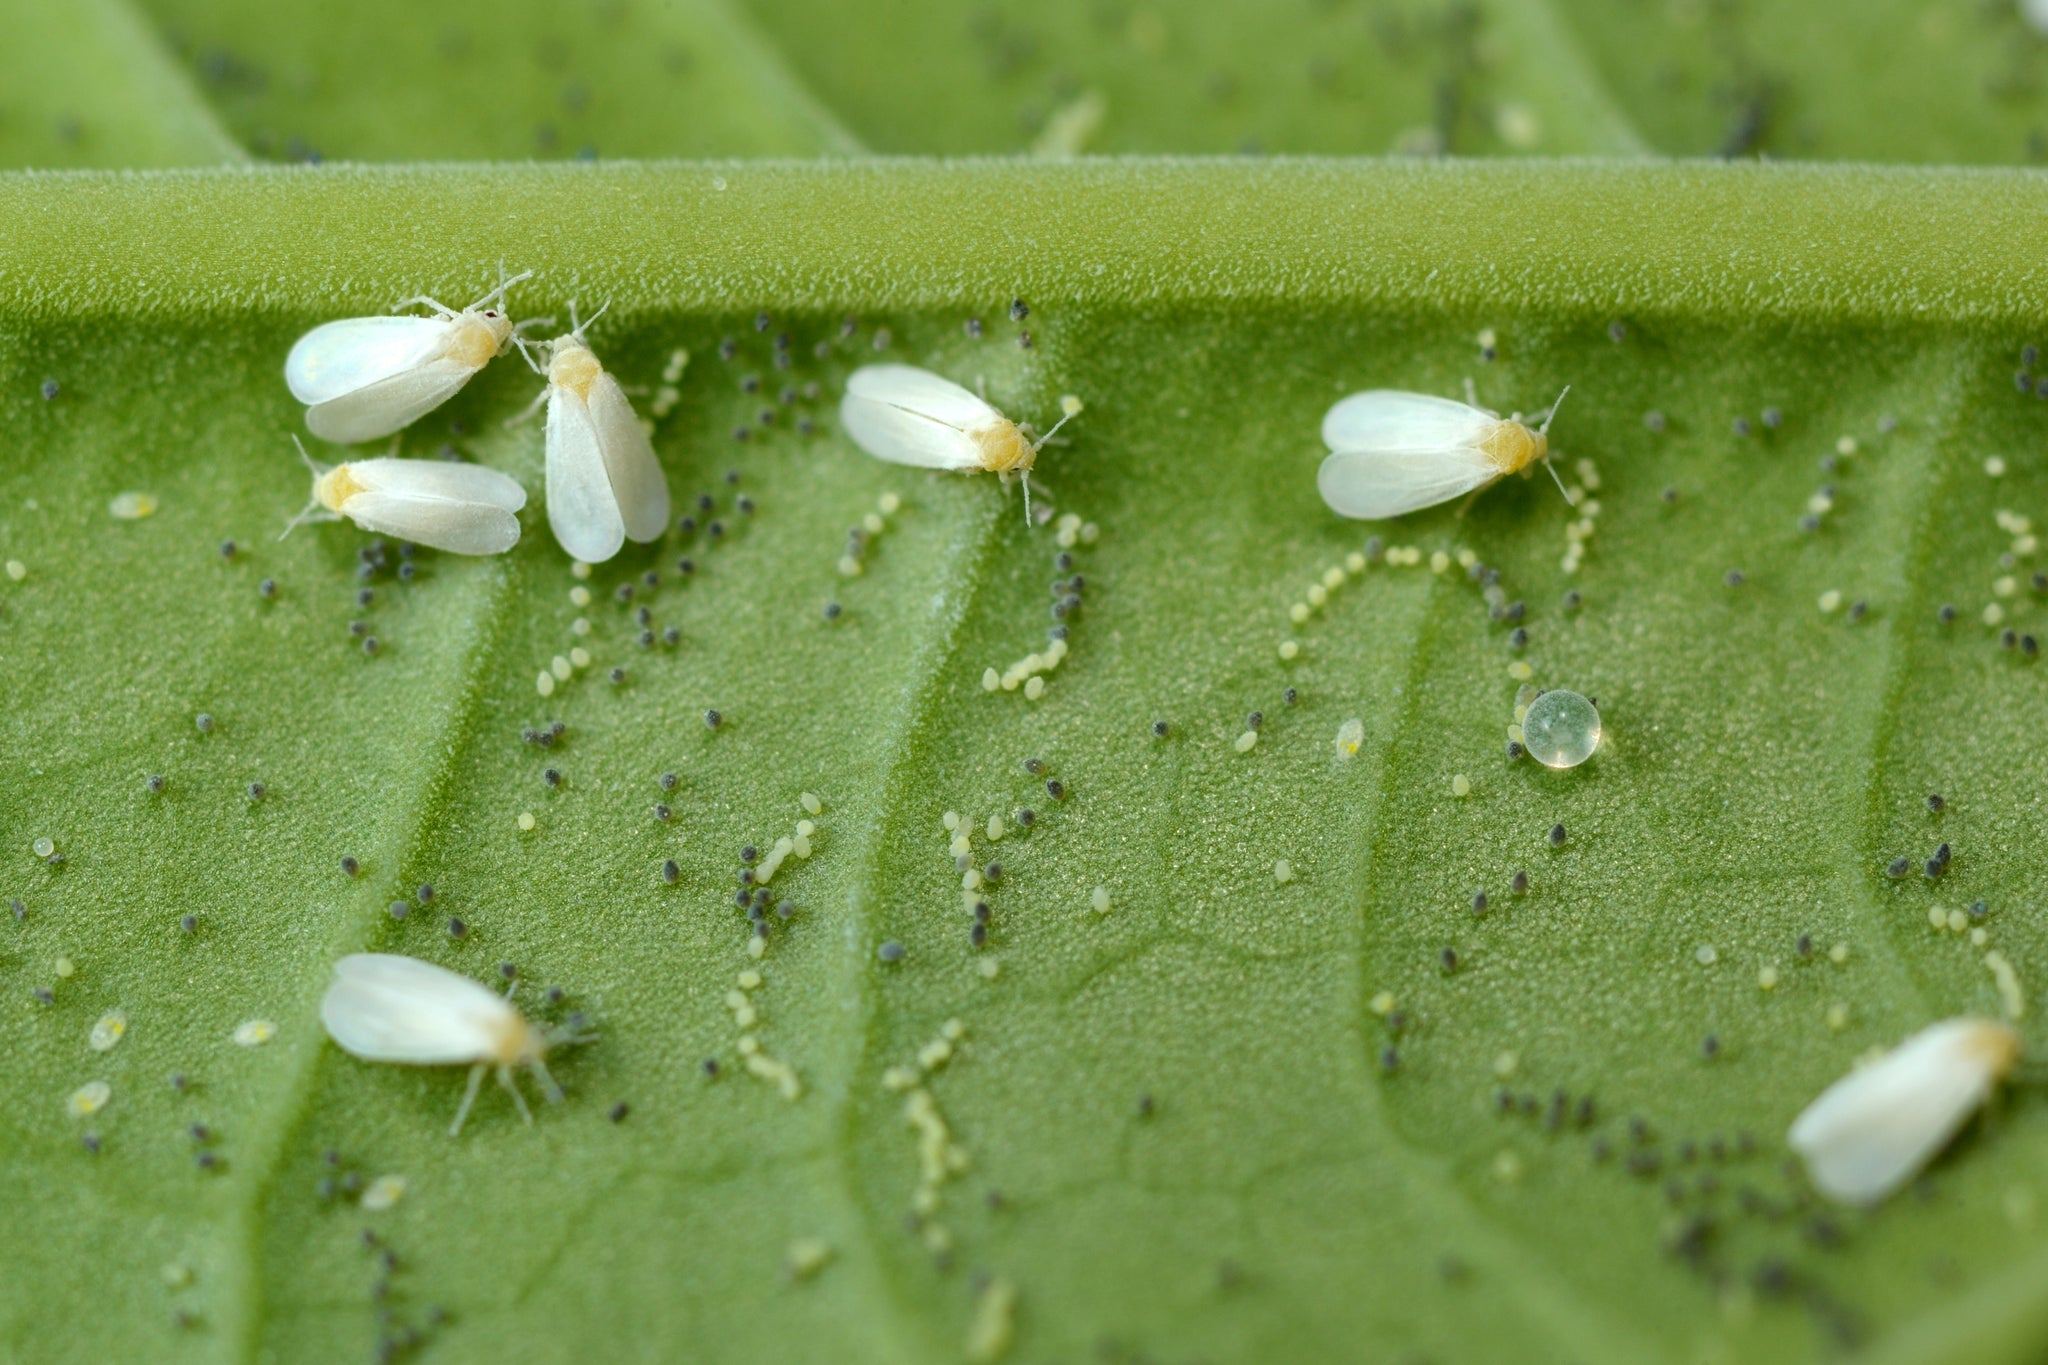 Common Houseplant Pests: How to Deal with Whitefly